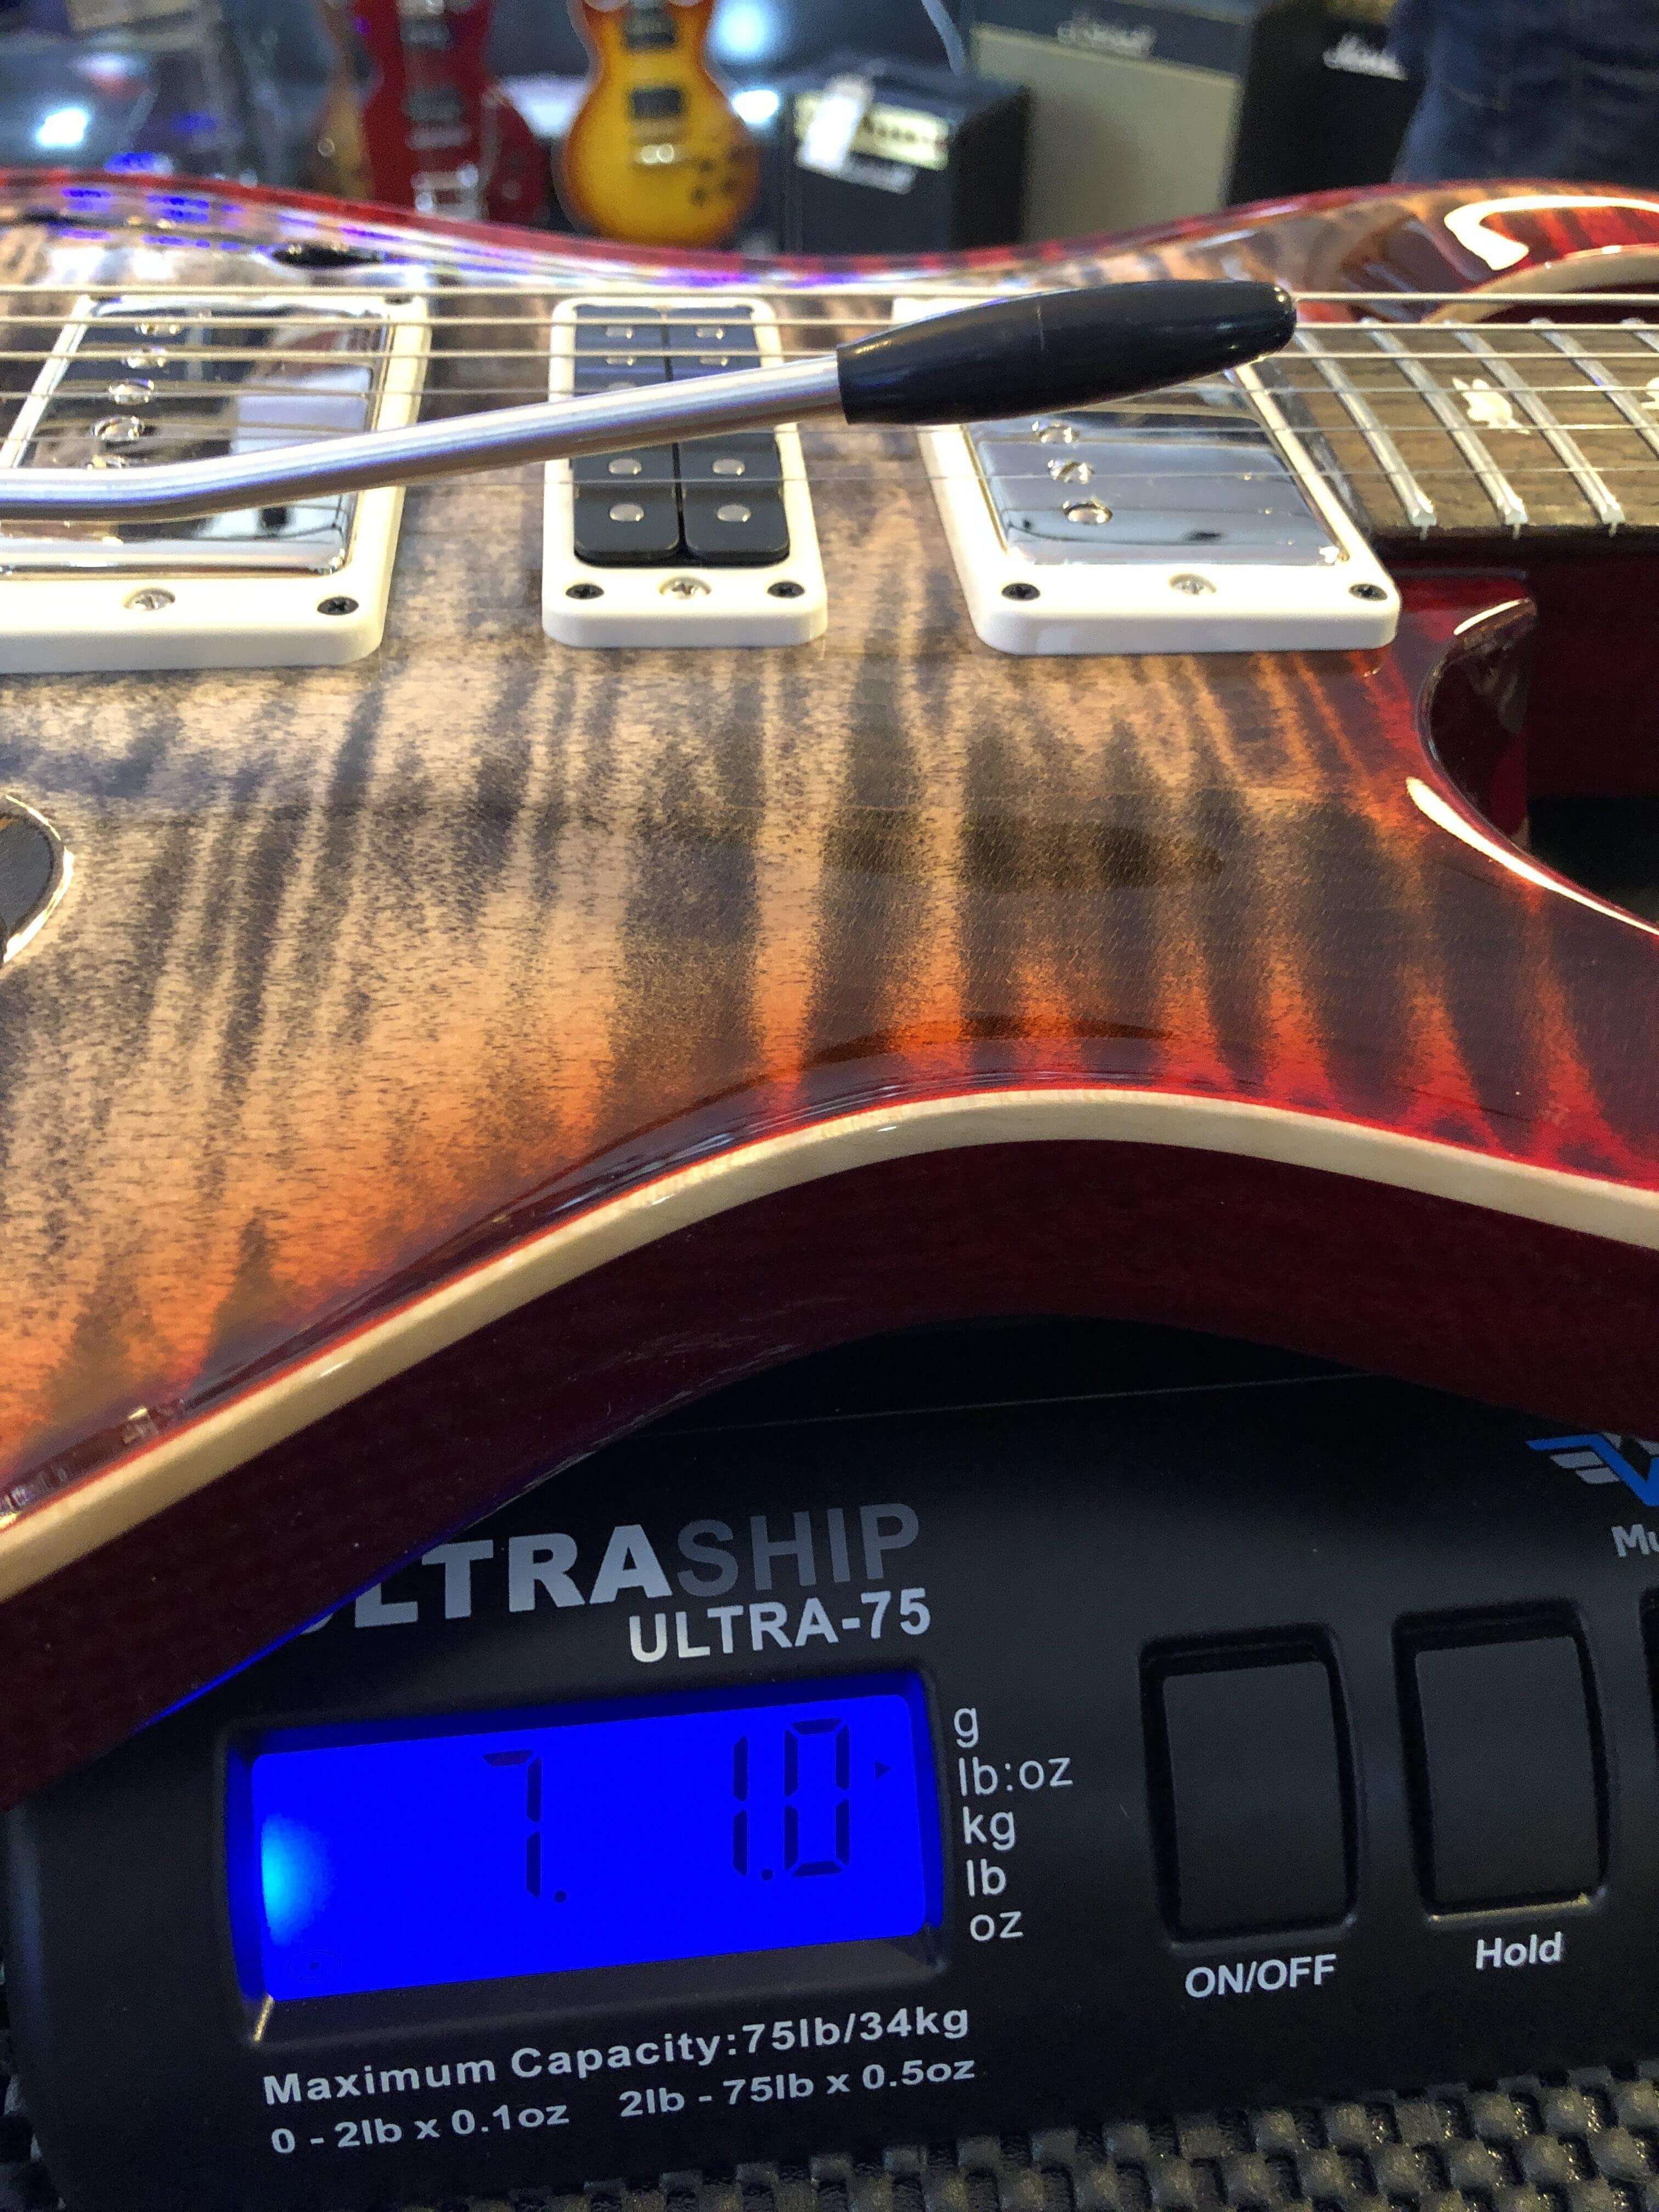 PRS Special Semi Hollow Limited Edition - Charcoal Cherryburst - MusicStreet